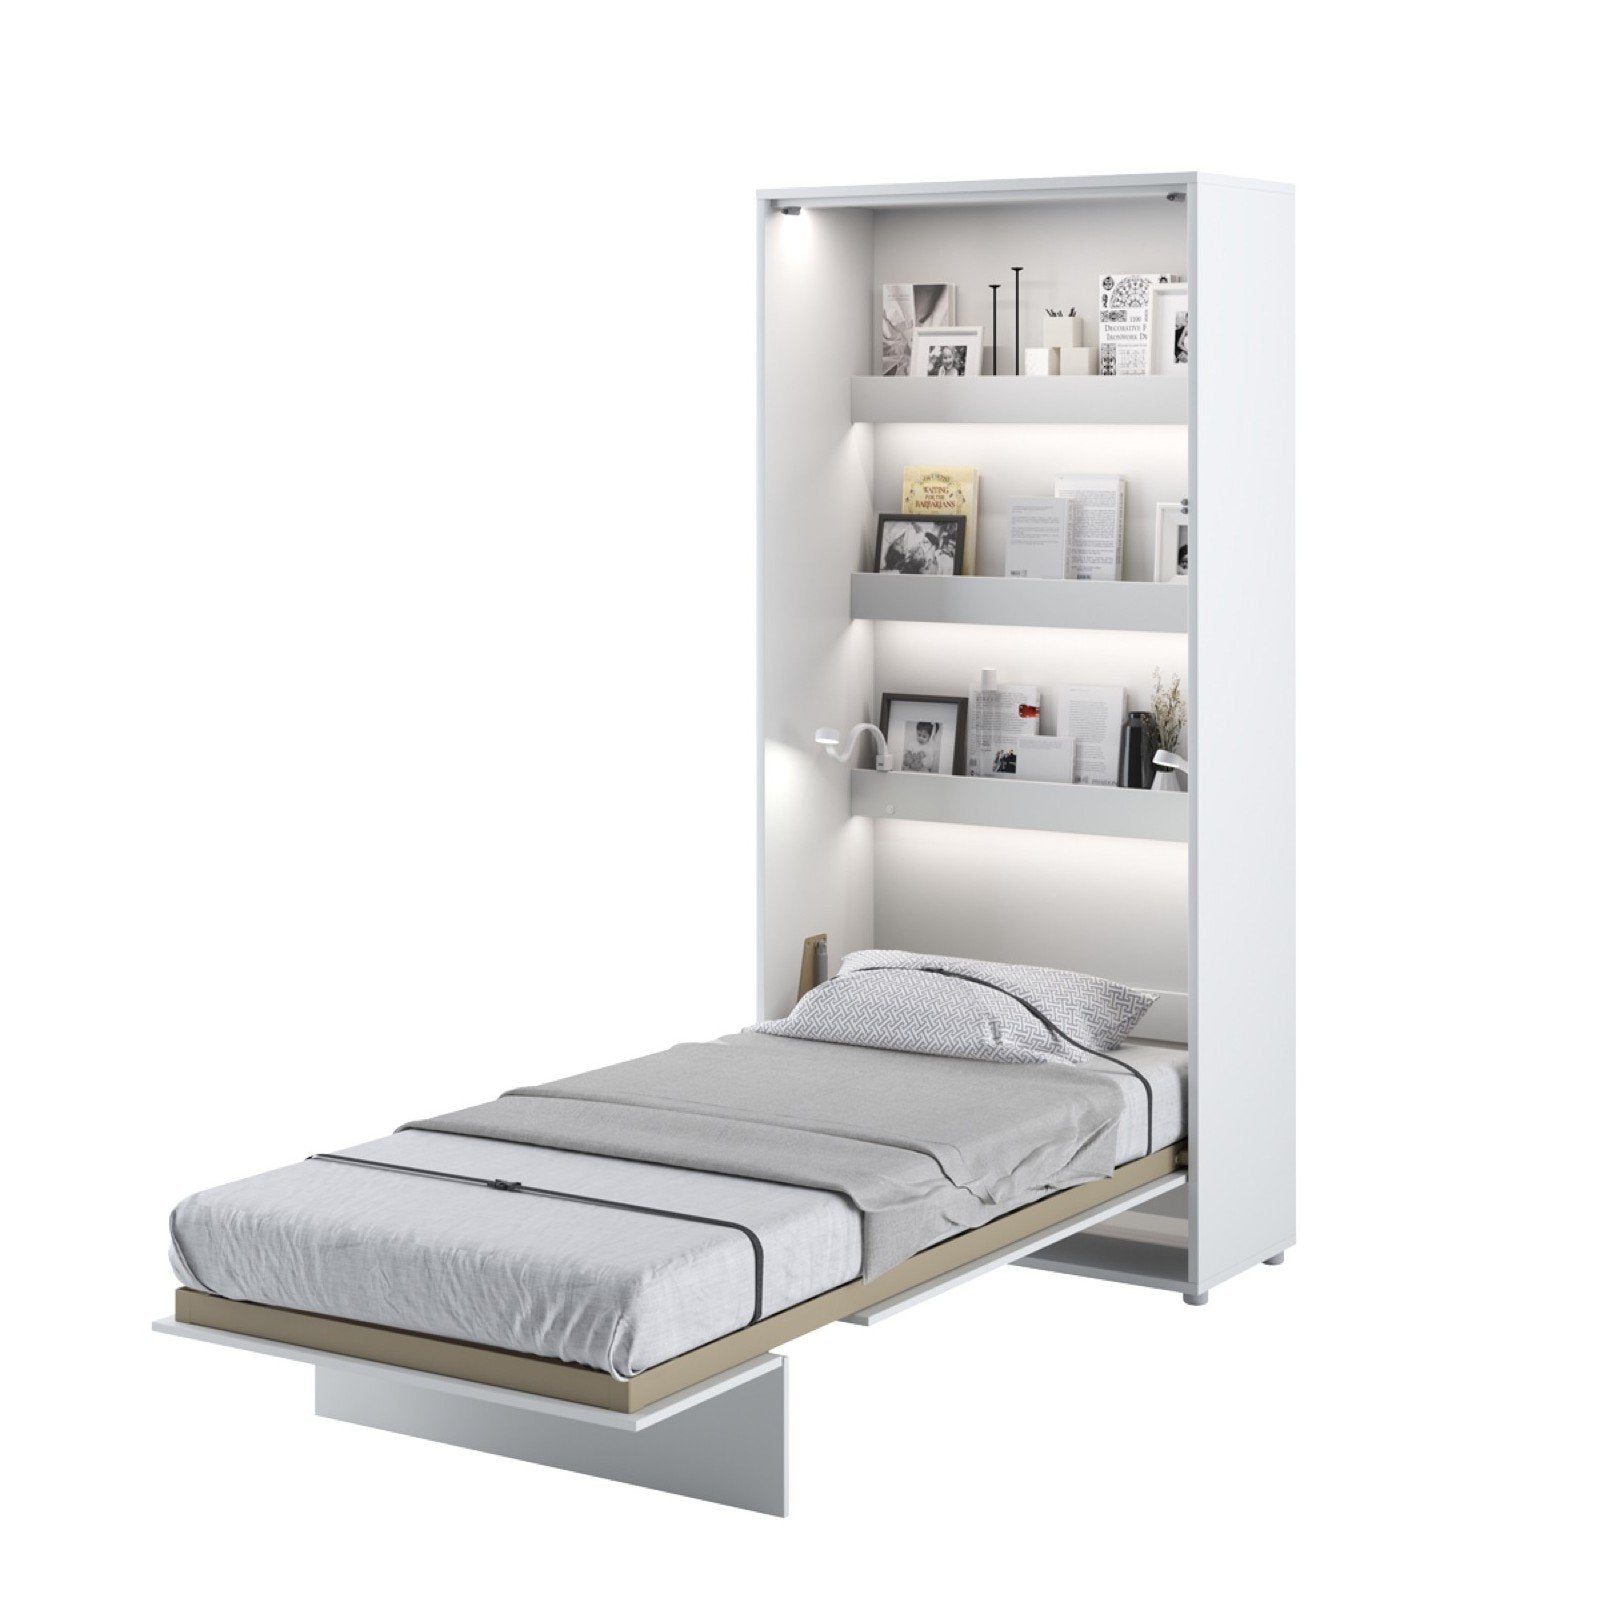 BC-03 Vertical Wall Bed Concept 90cm-Wall Bed